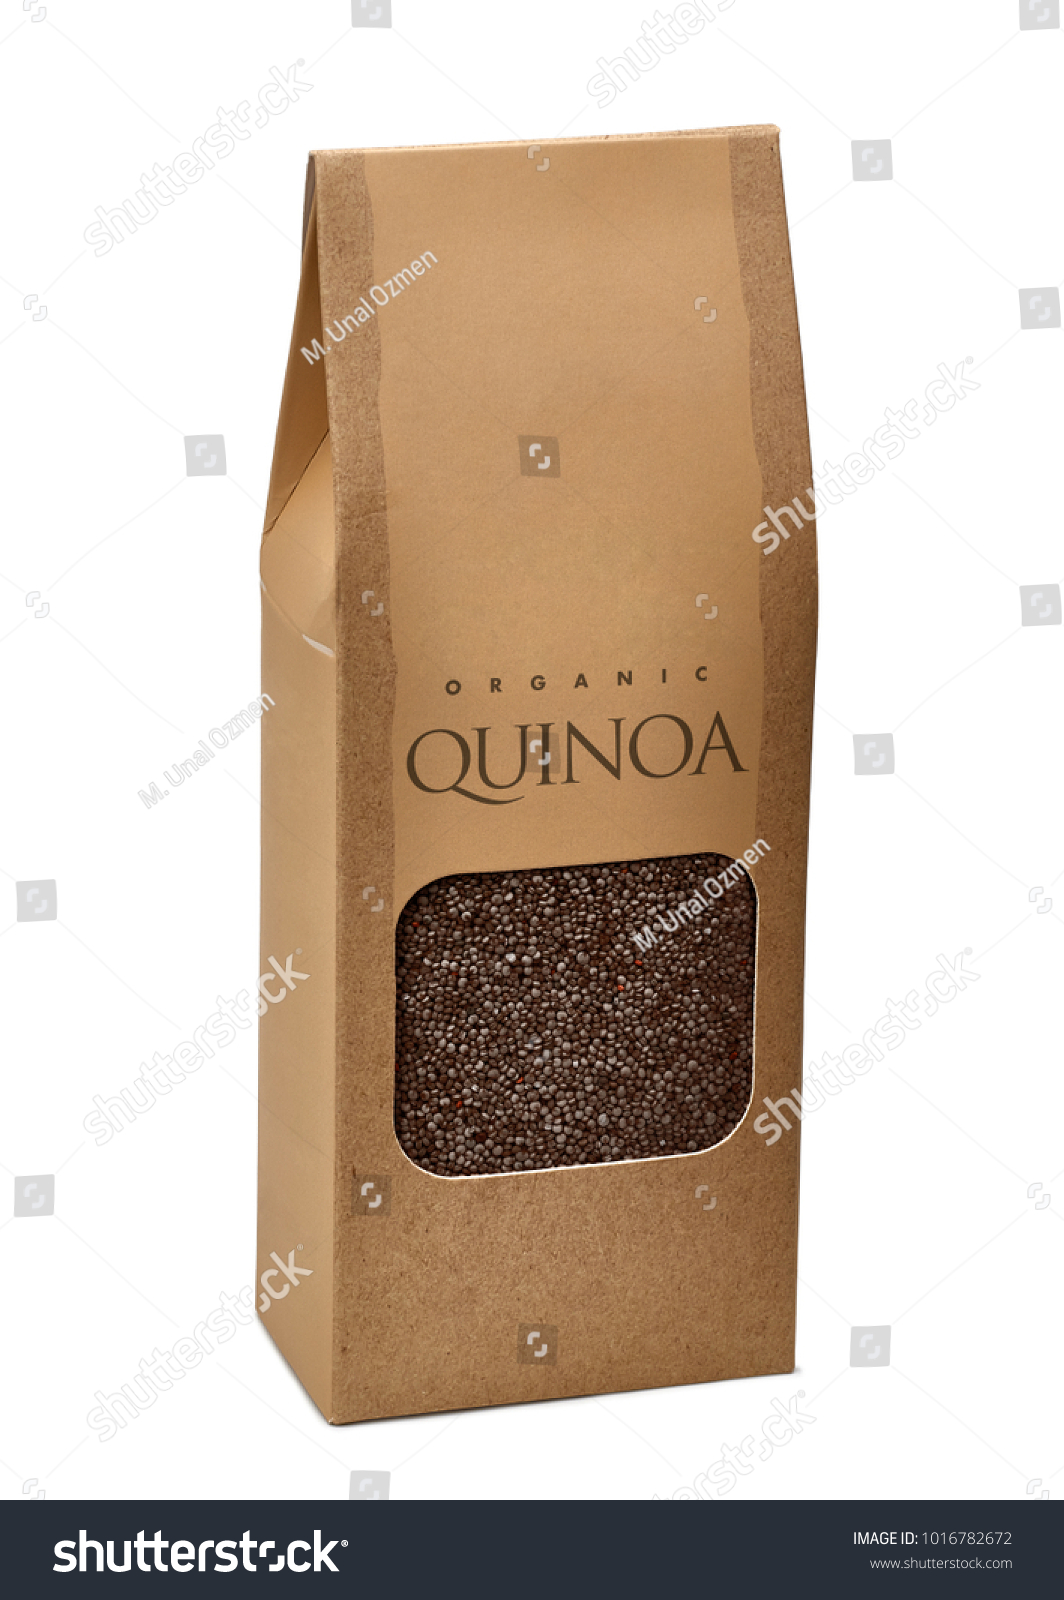 Black quinoa seeds in brown paper bag with transparent die cut window on white background including clipping path with generic quinoa typing. #1016782672